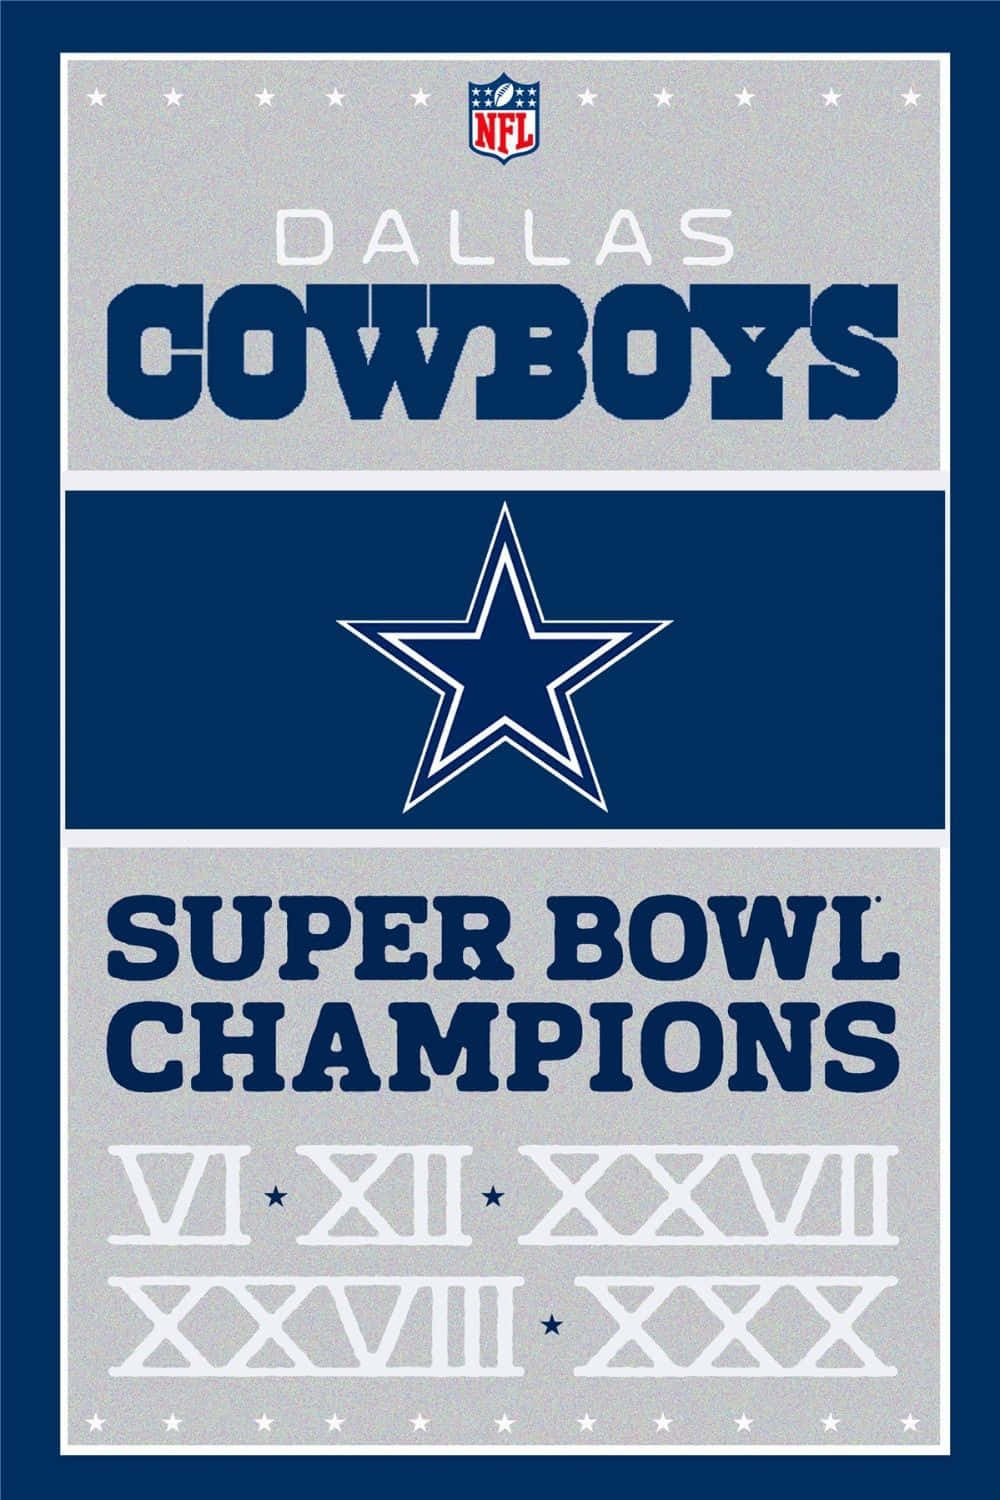 Show Your Support For Your Favorite Team with a Cowboys Iphone Wallpaper